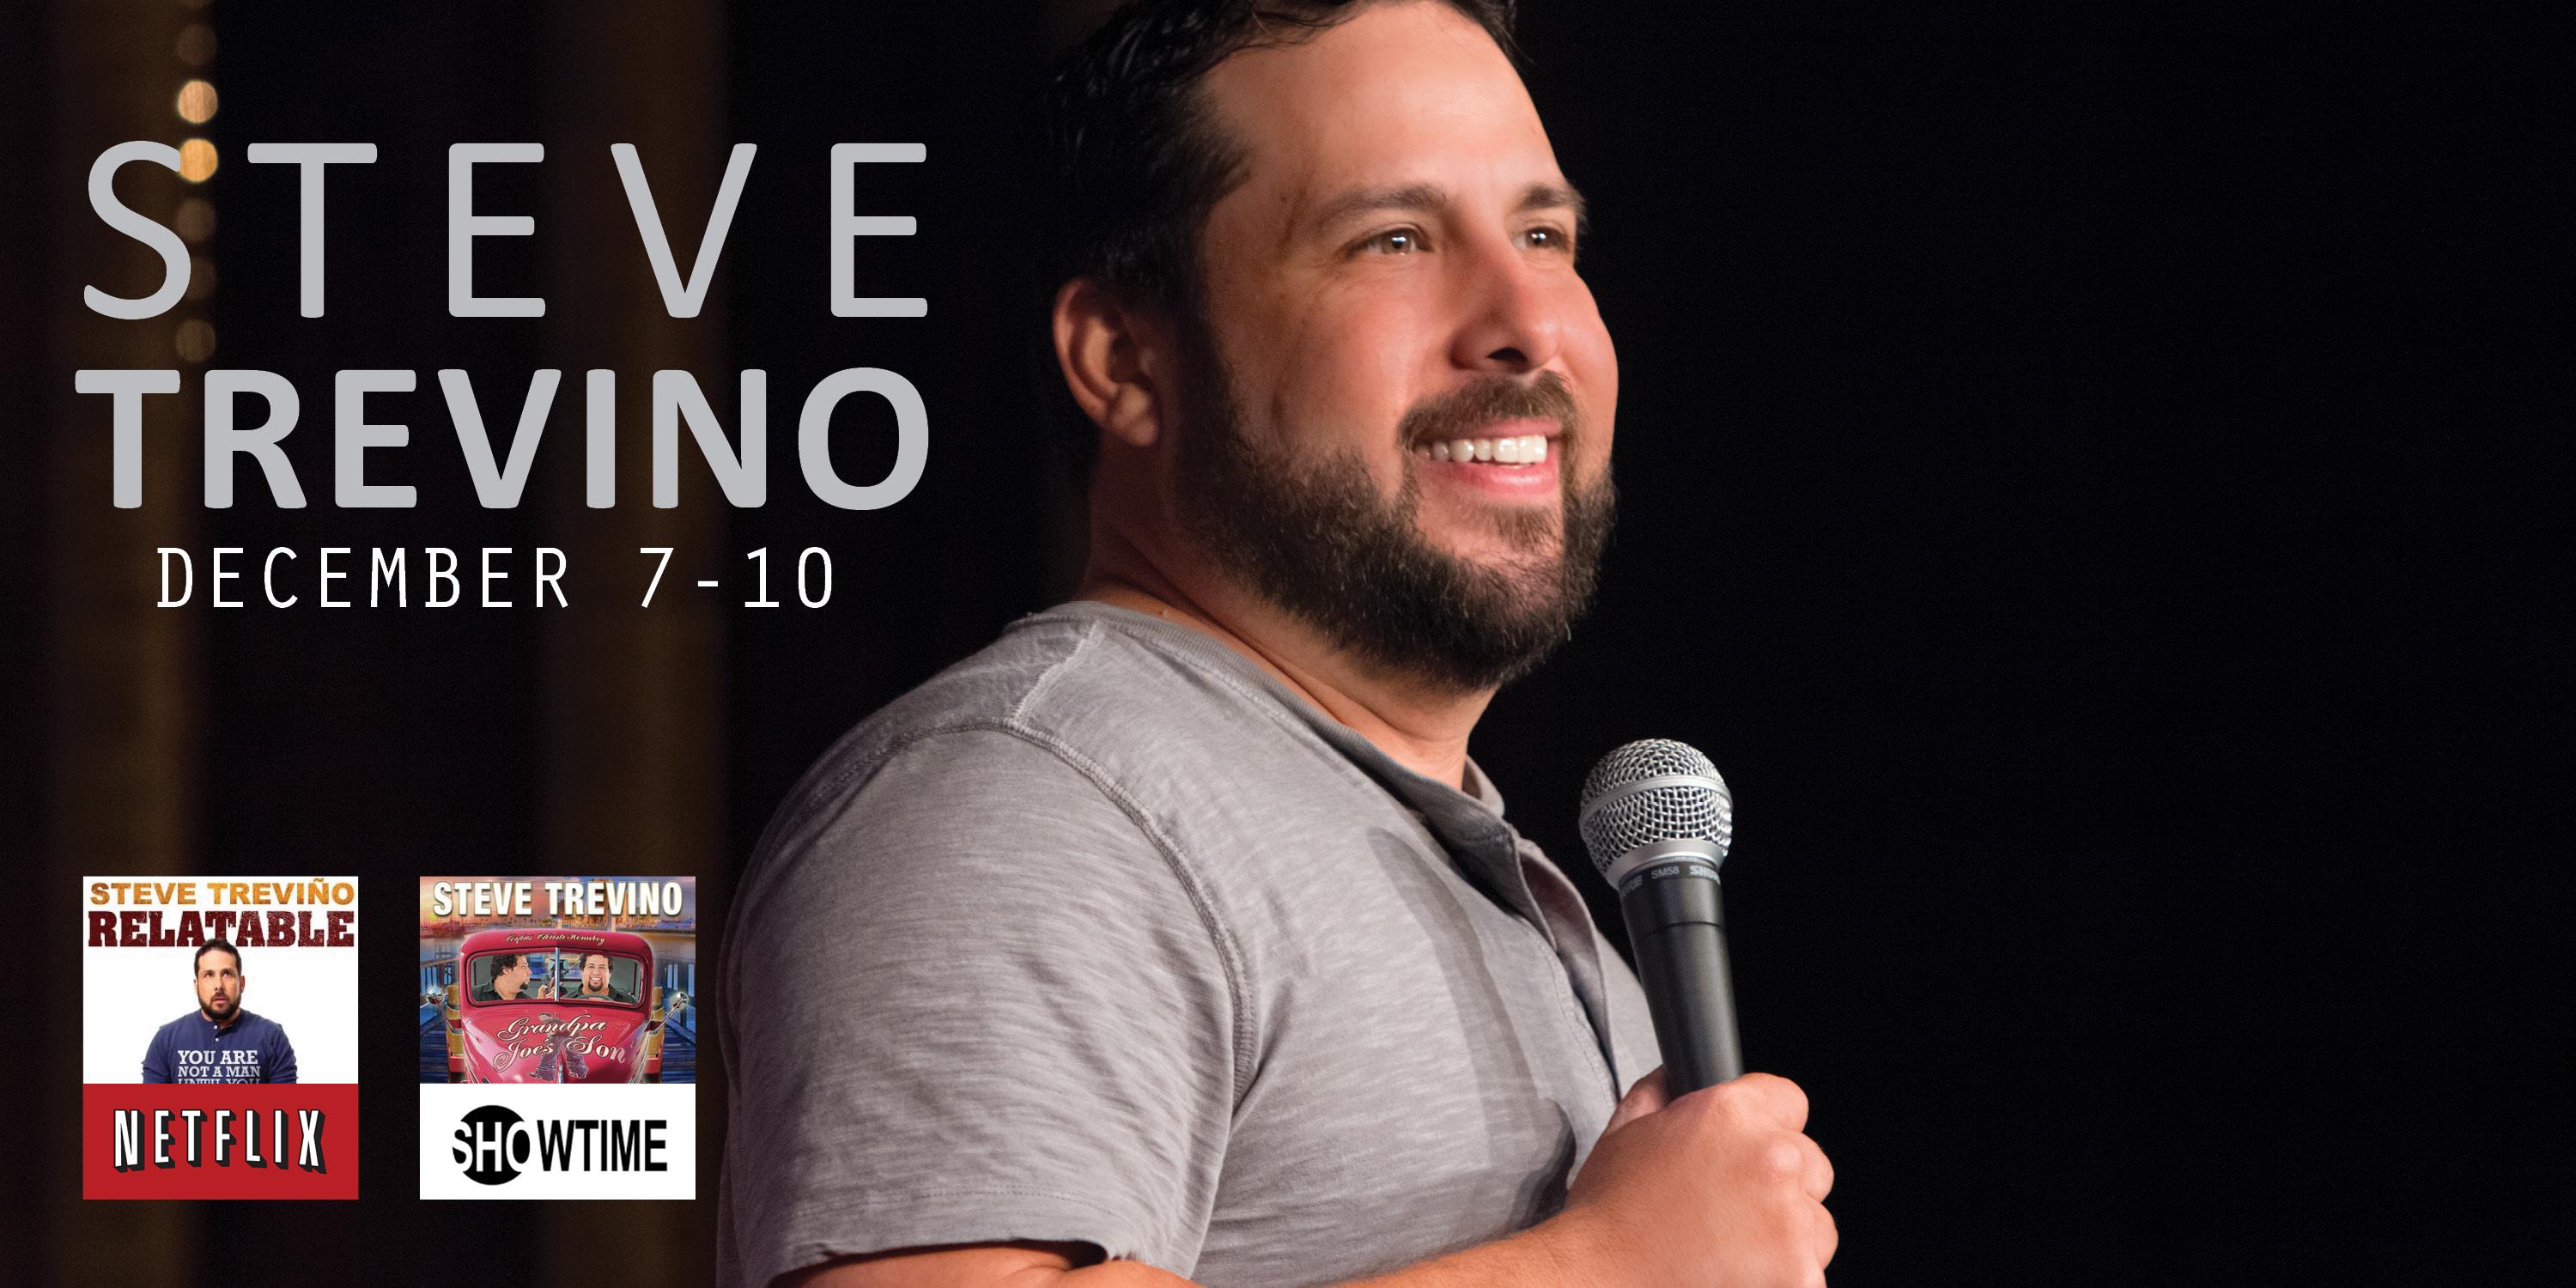 Comedian Steve Trevino Live at Off the hook comedy club Naples, Florida